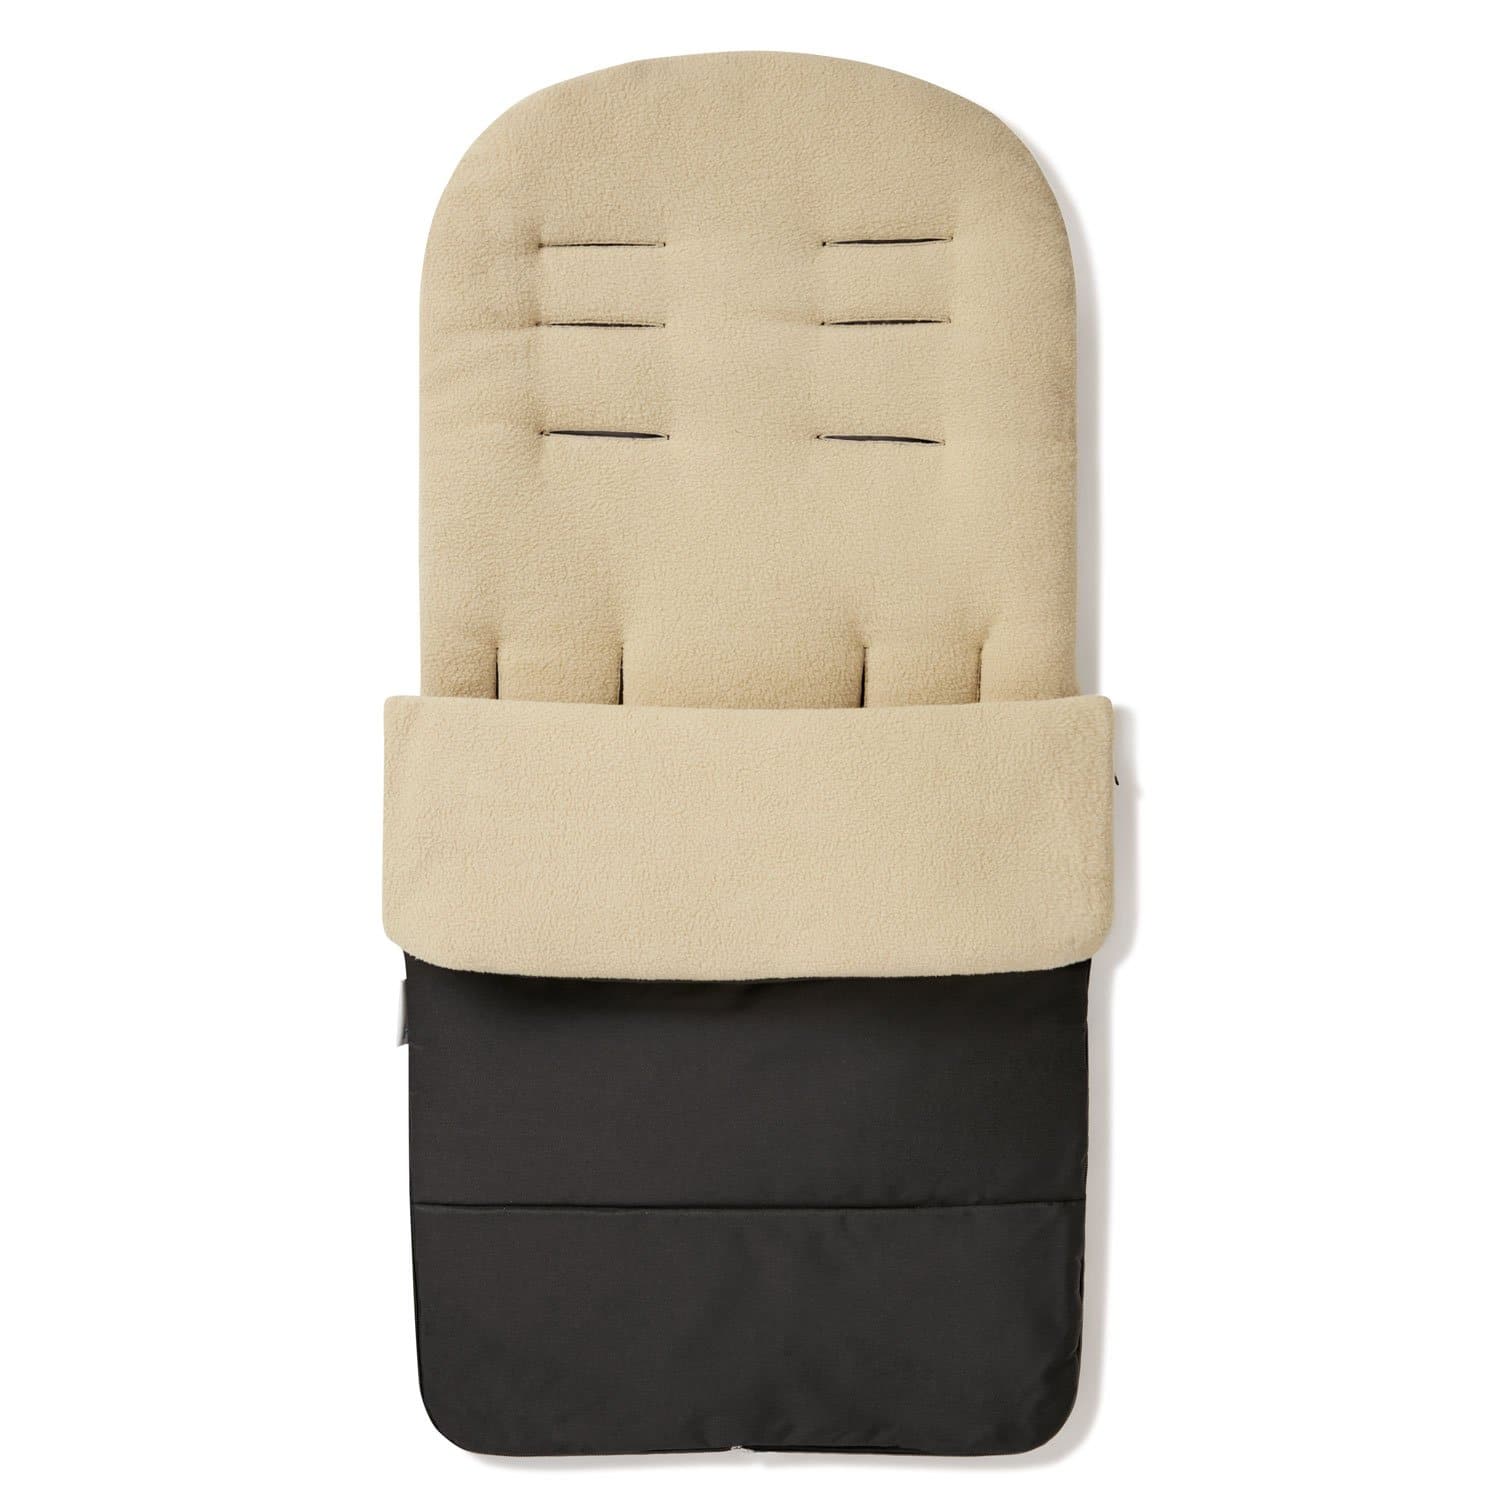 Premium Footmuff / Cosy Toes Compatible with Babystyle - Desert Sand / Fits All Models | For Your Little One